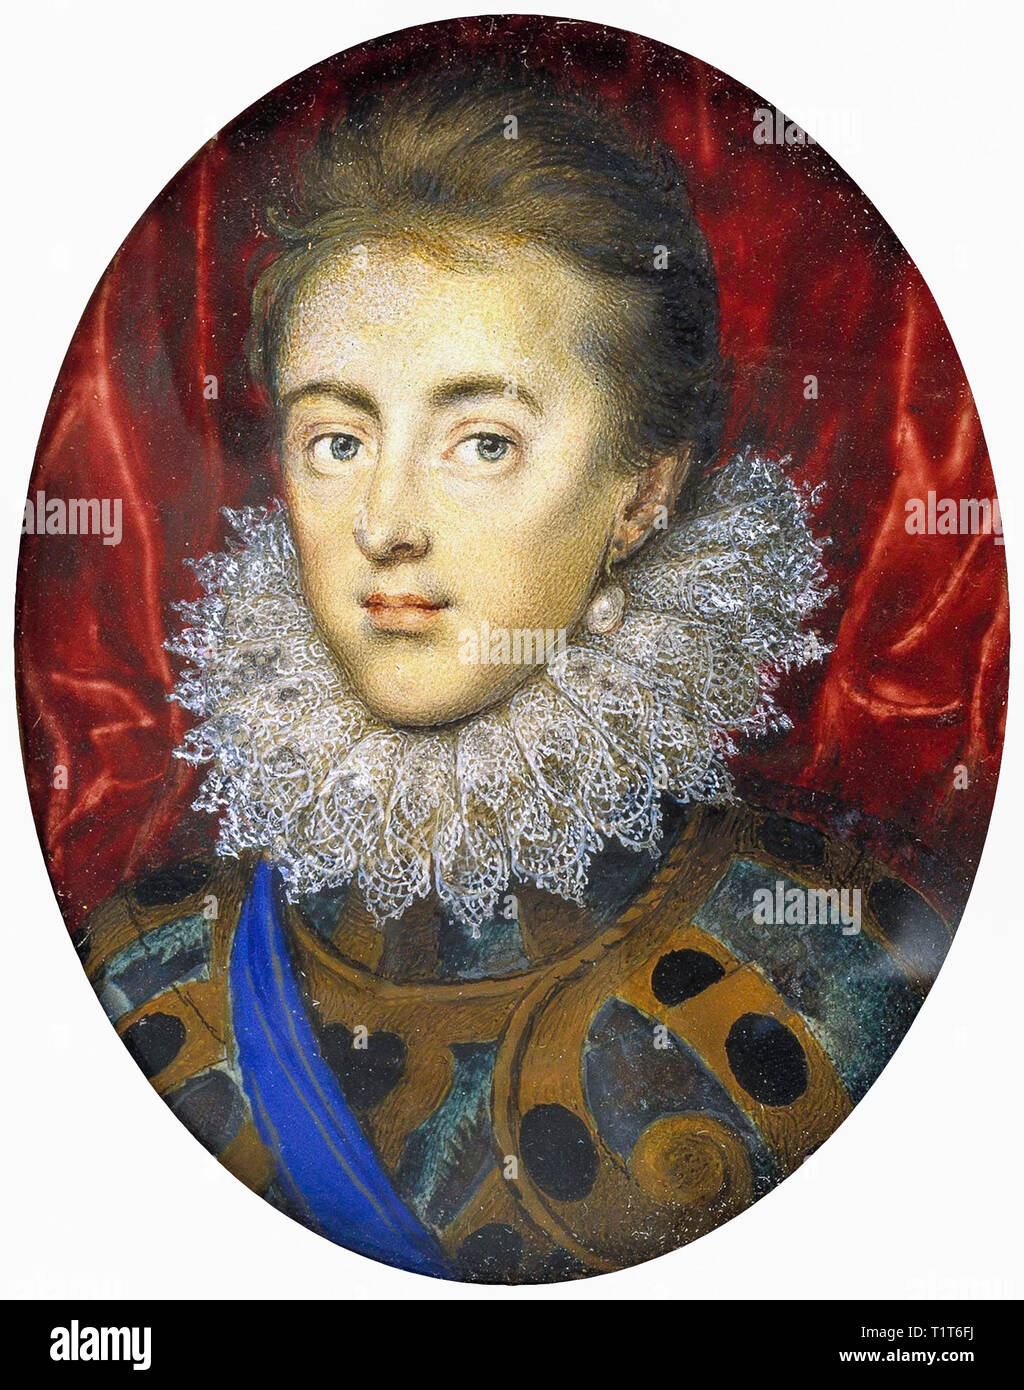 Charles, Prince of Wales (später Charles I) als junger Mann in 1615, Isaac Oliver Stockfoto